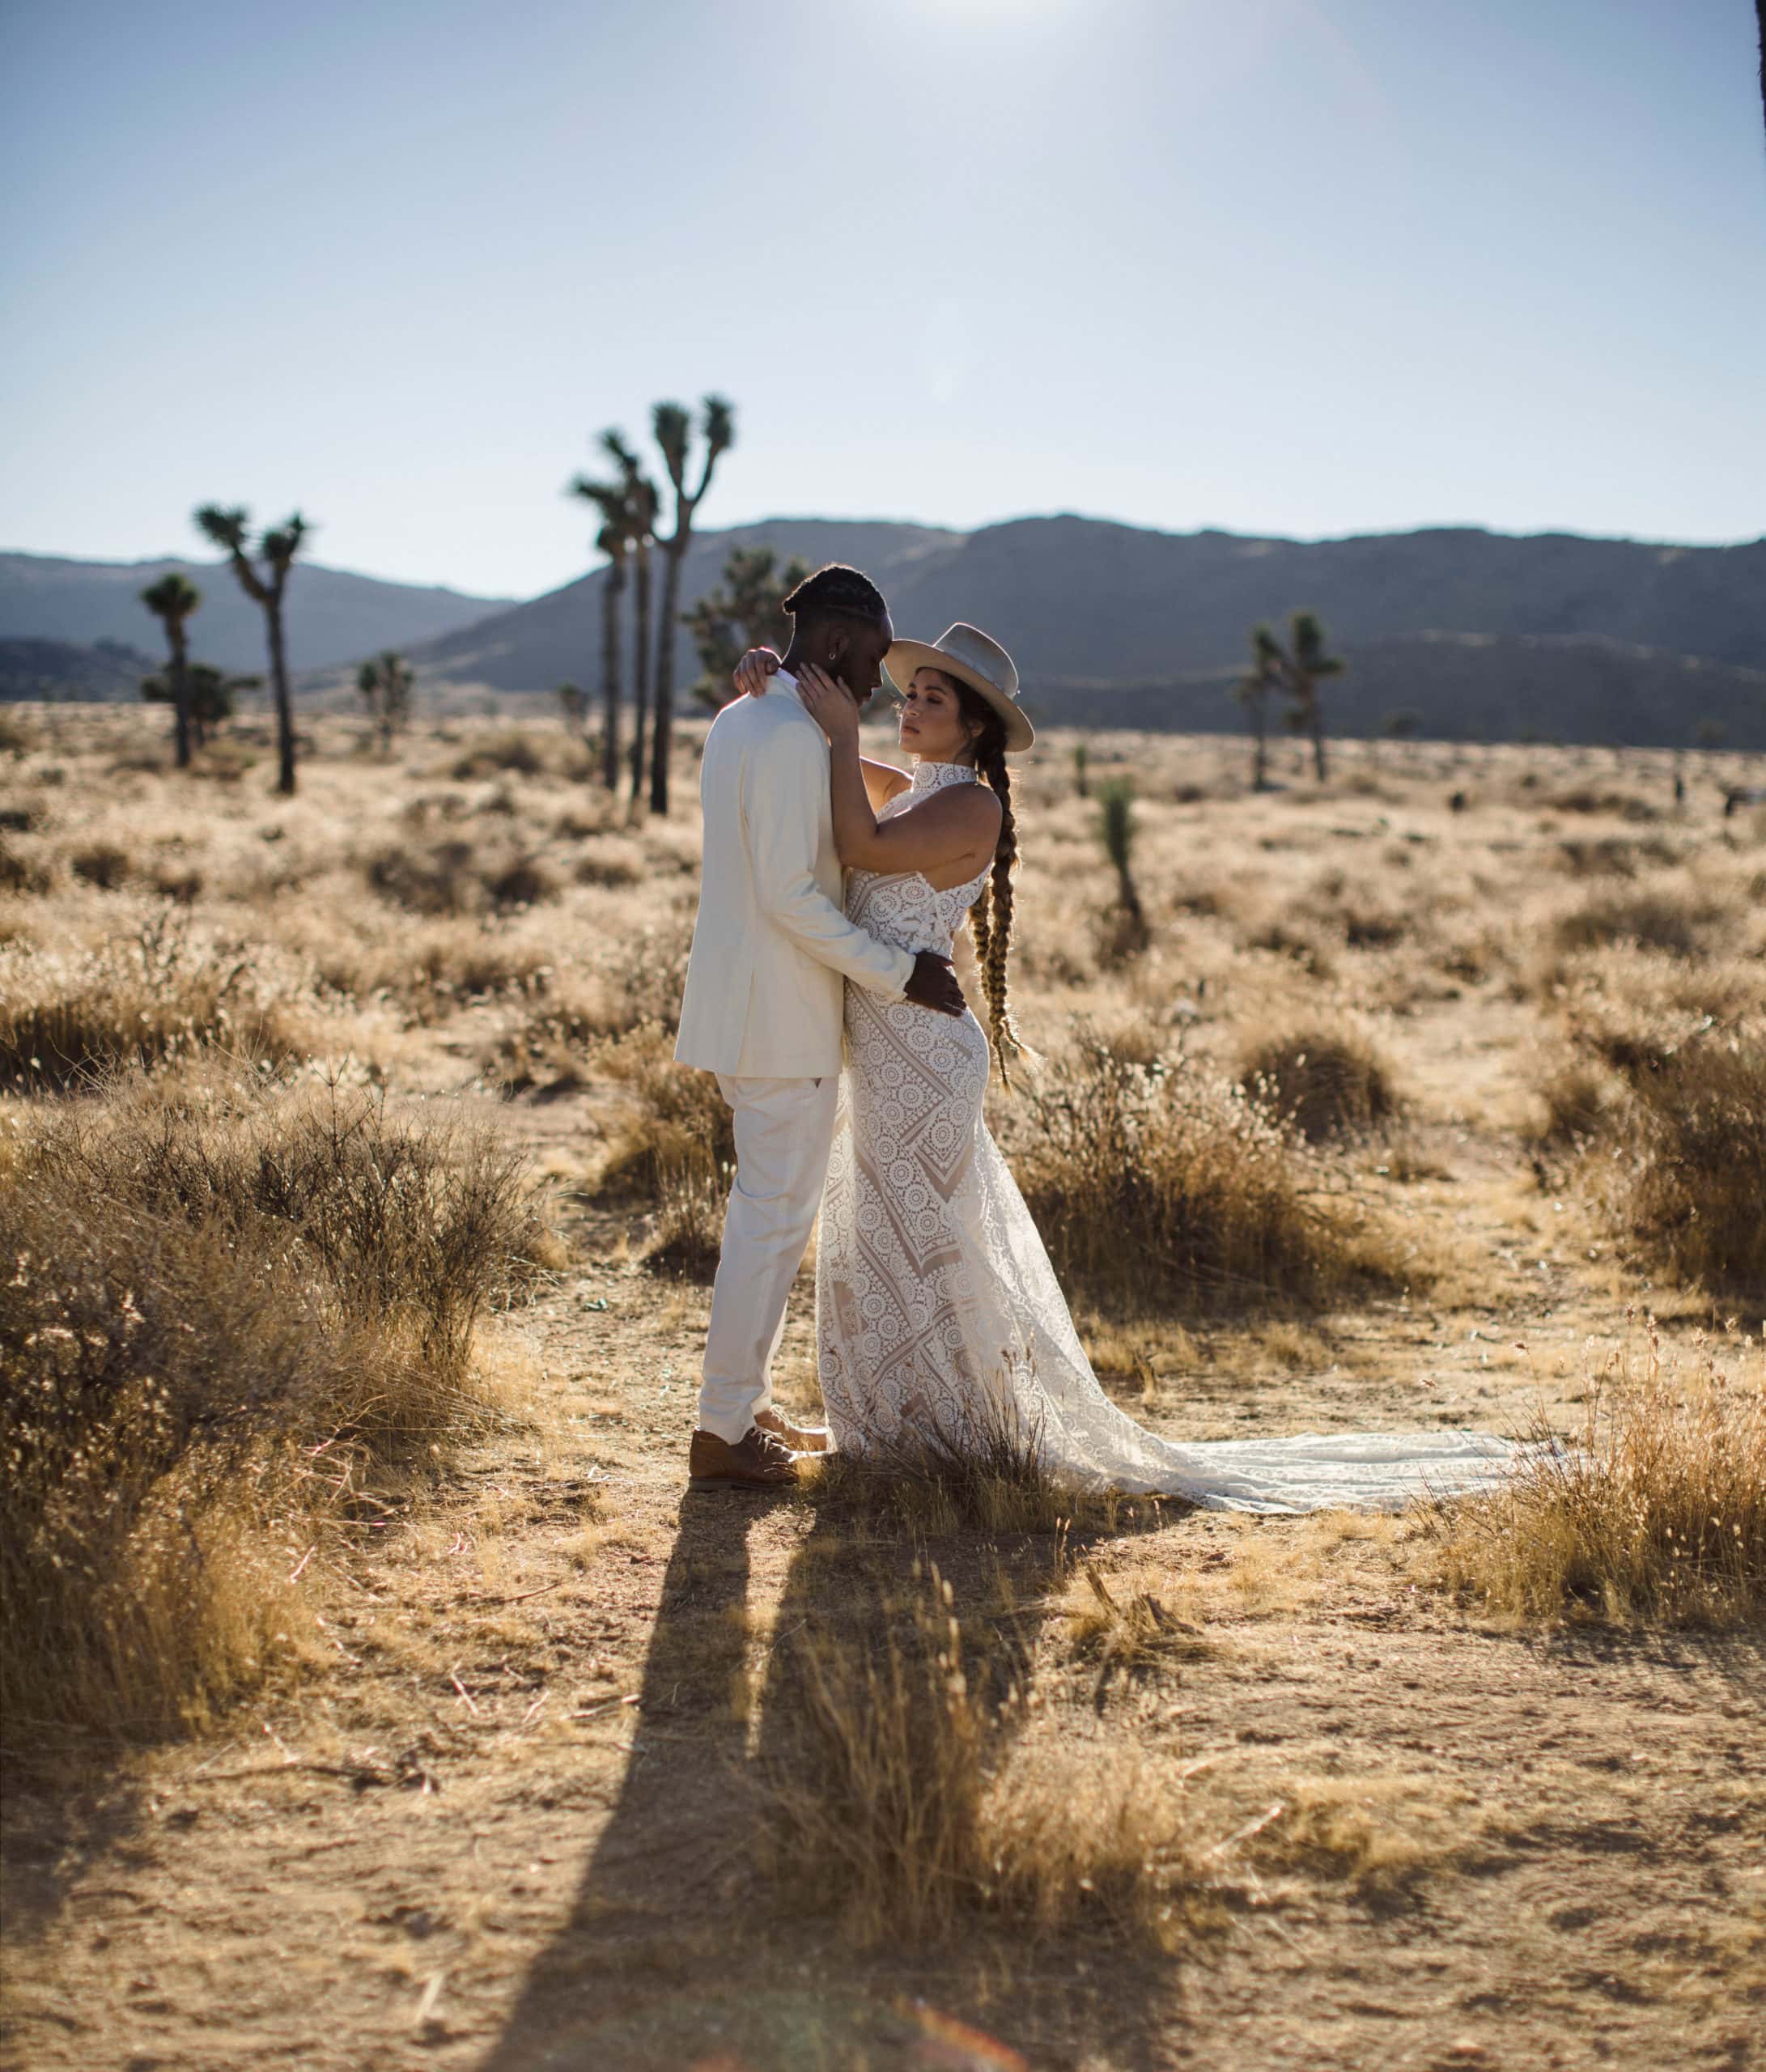 A couple chose to get married in a national park, one of the best places to elope.